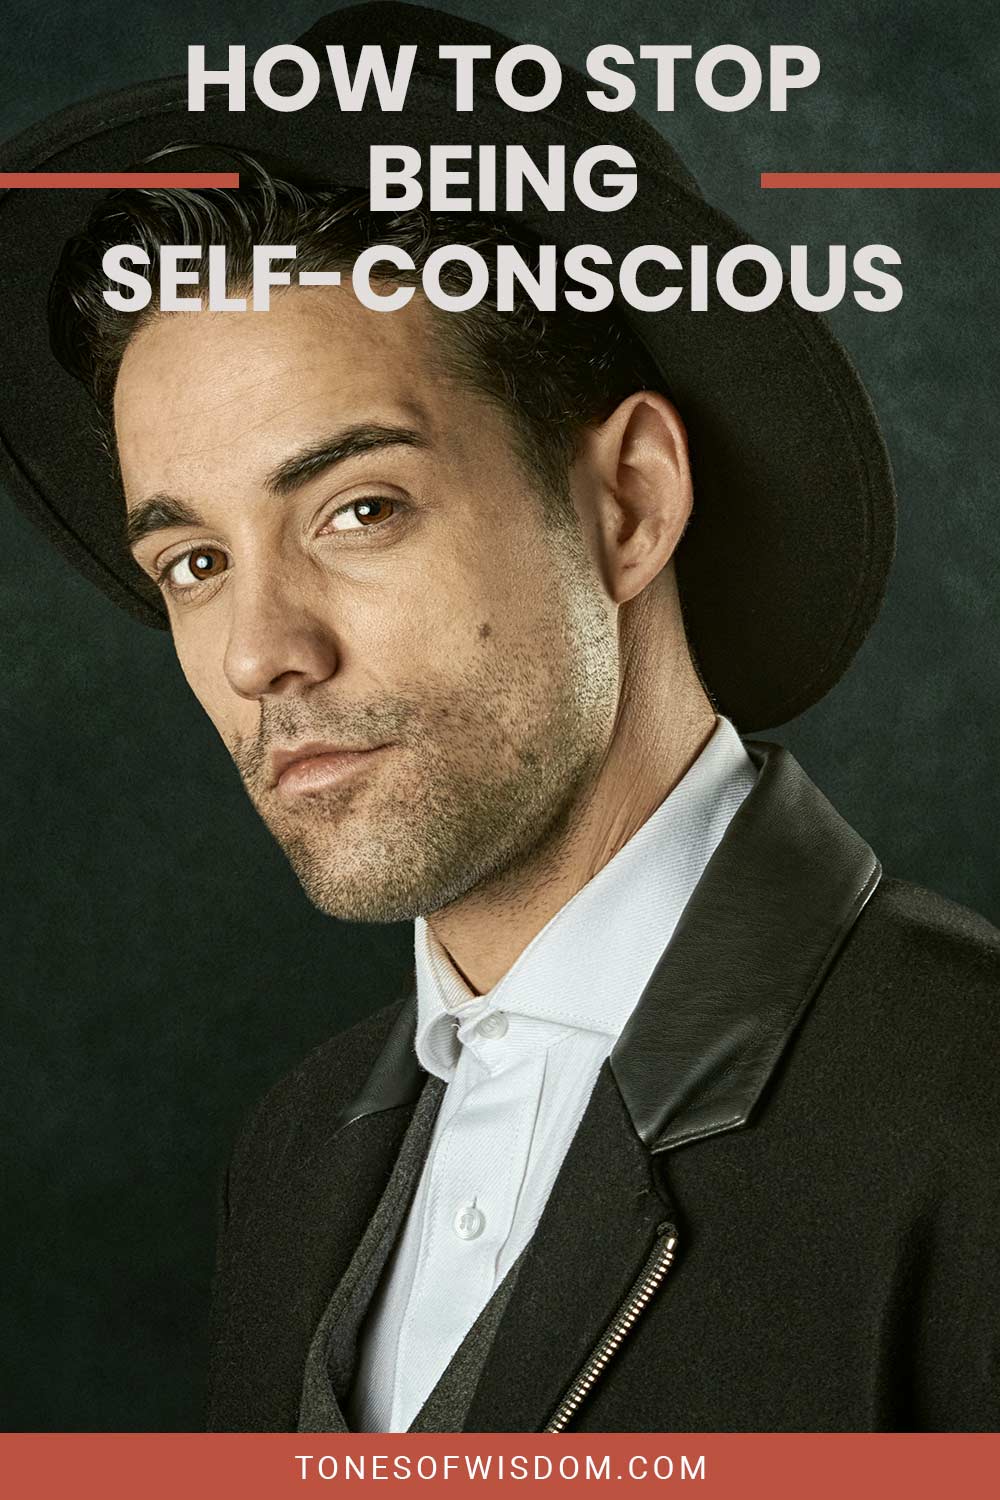 How to Stop being Self-Conscious